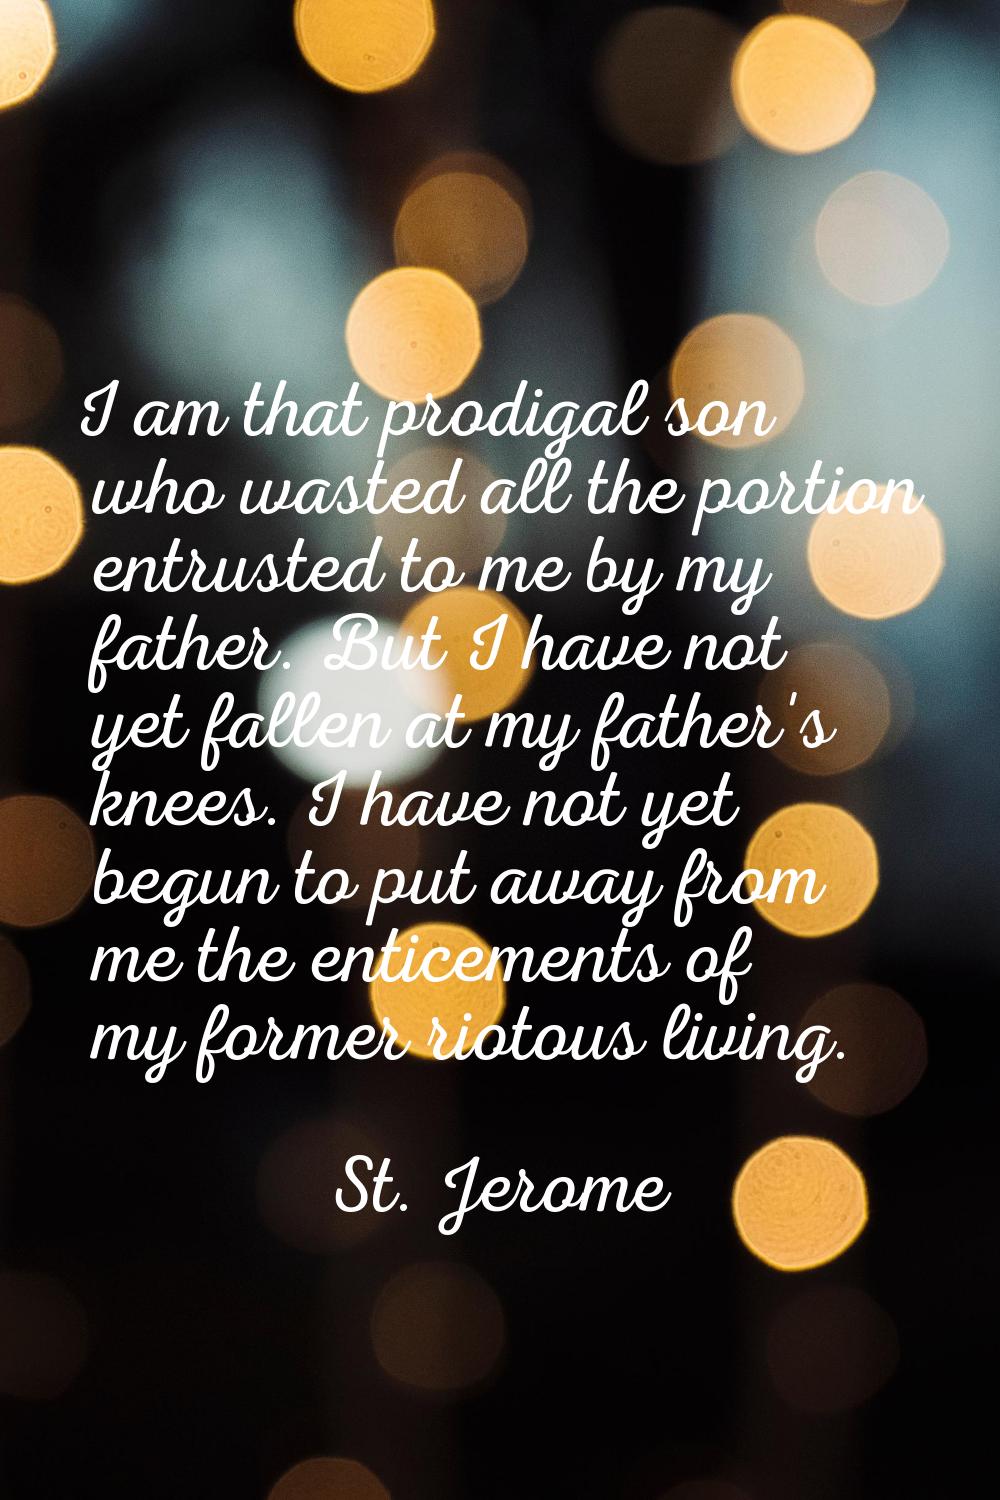 I am that prodigal son who wasted all the portion entrusted to me by my father. But I have not yet 